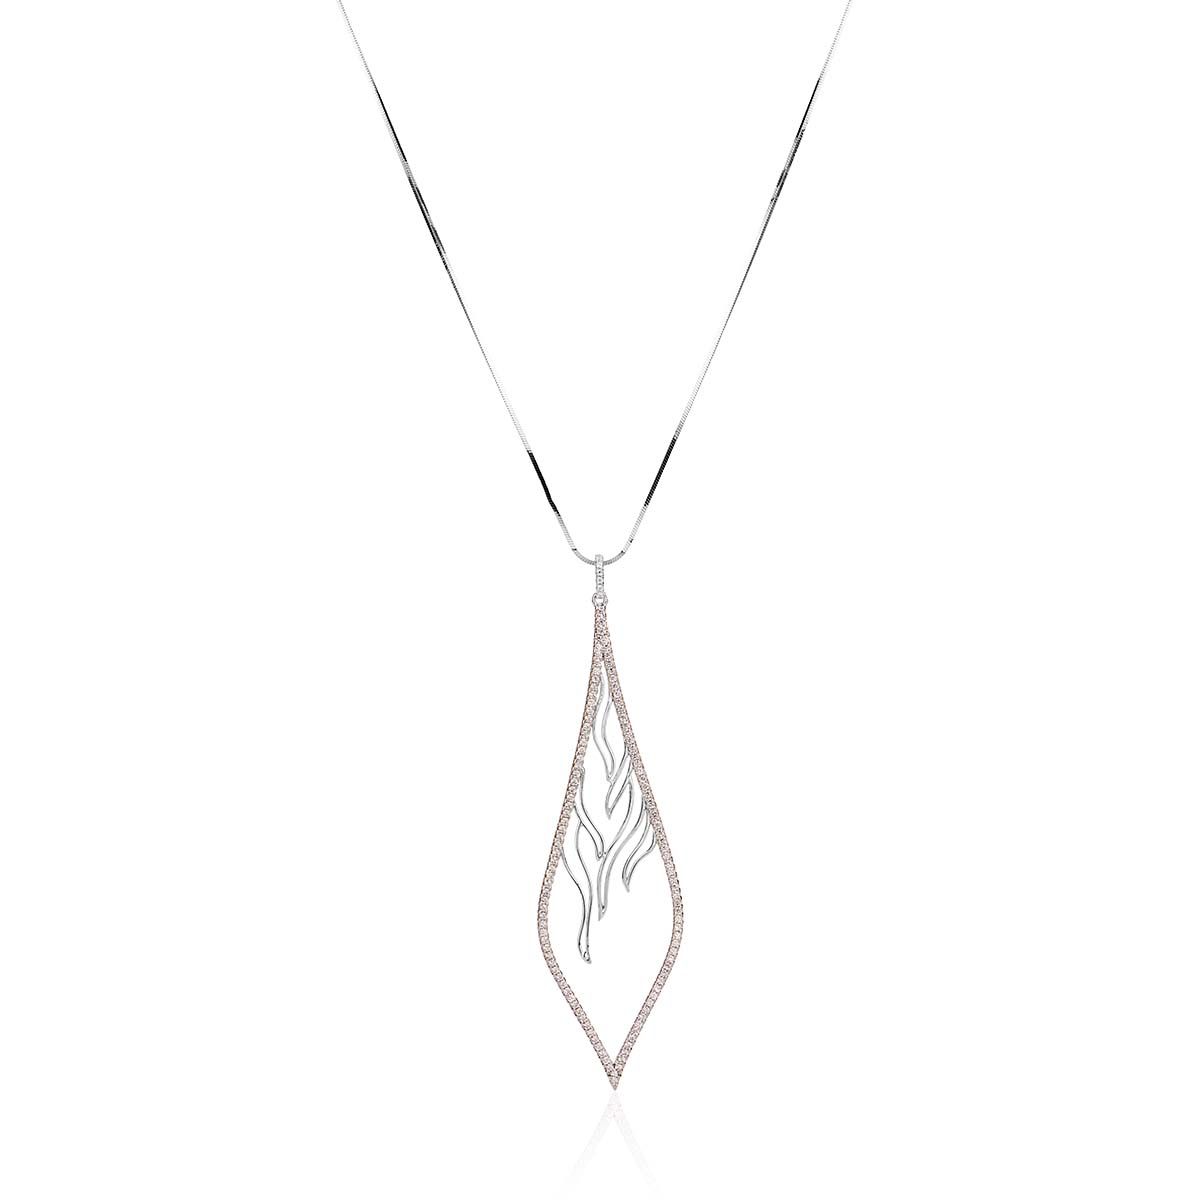 Collier Argent 925/1000 Oxyde